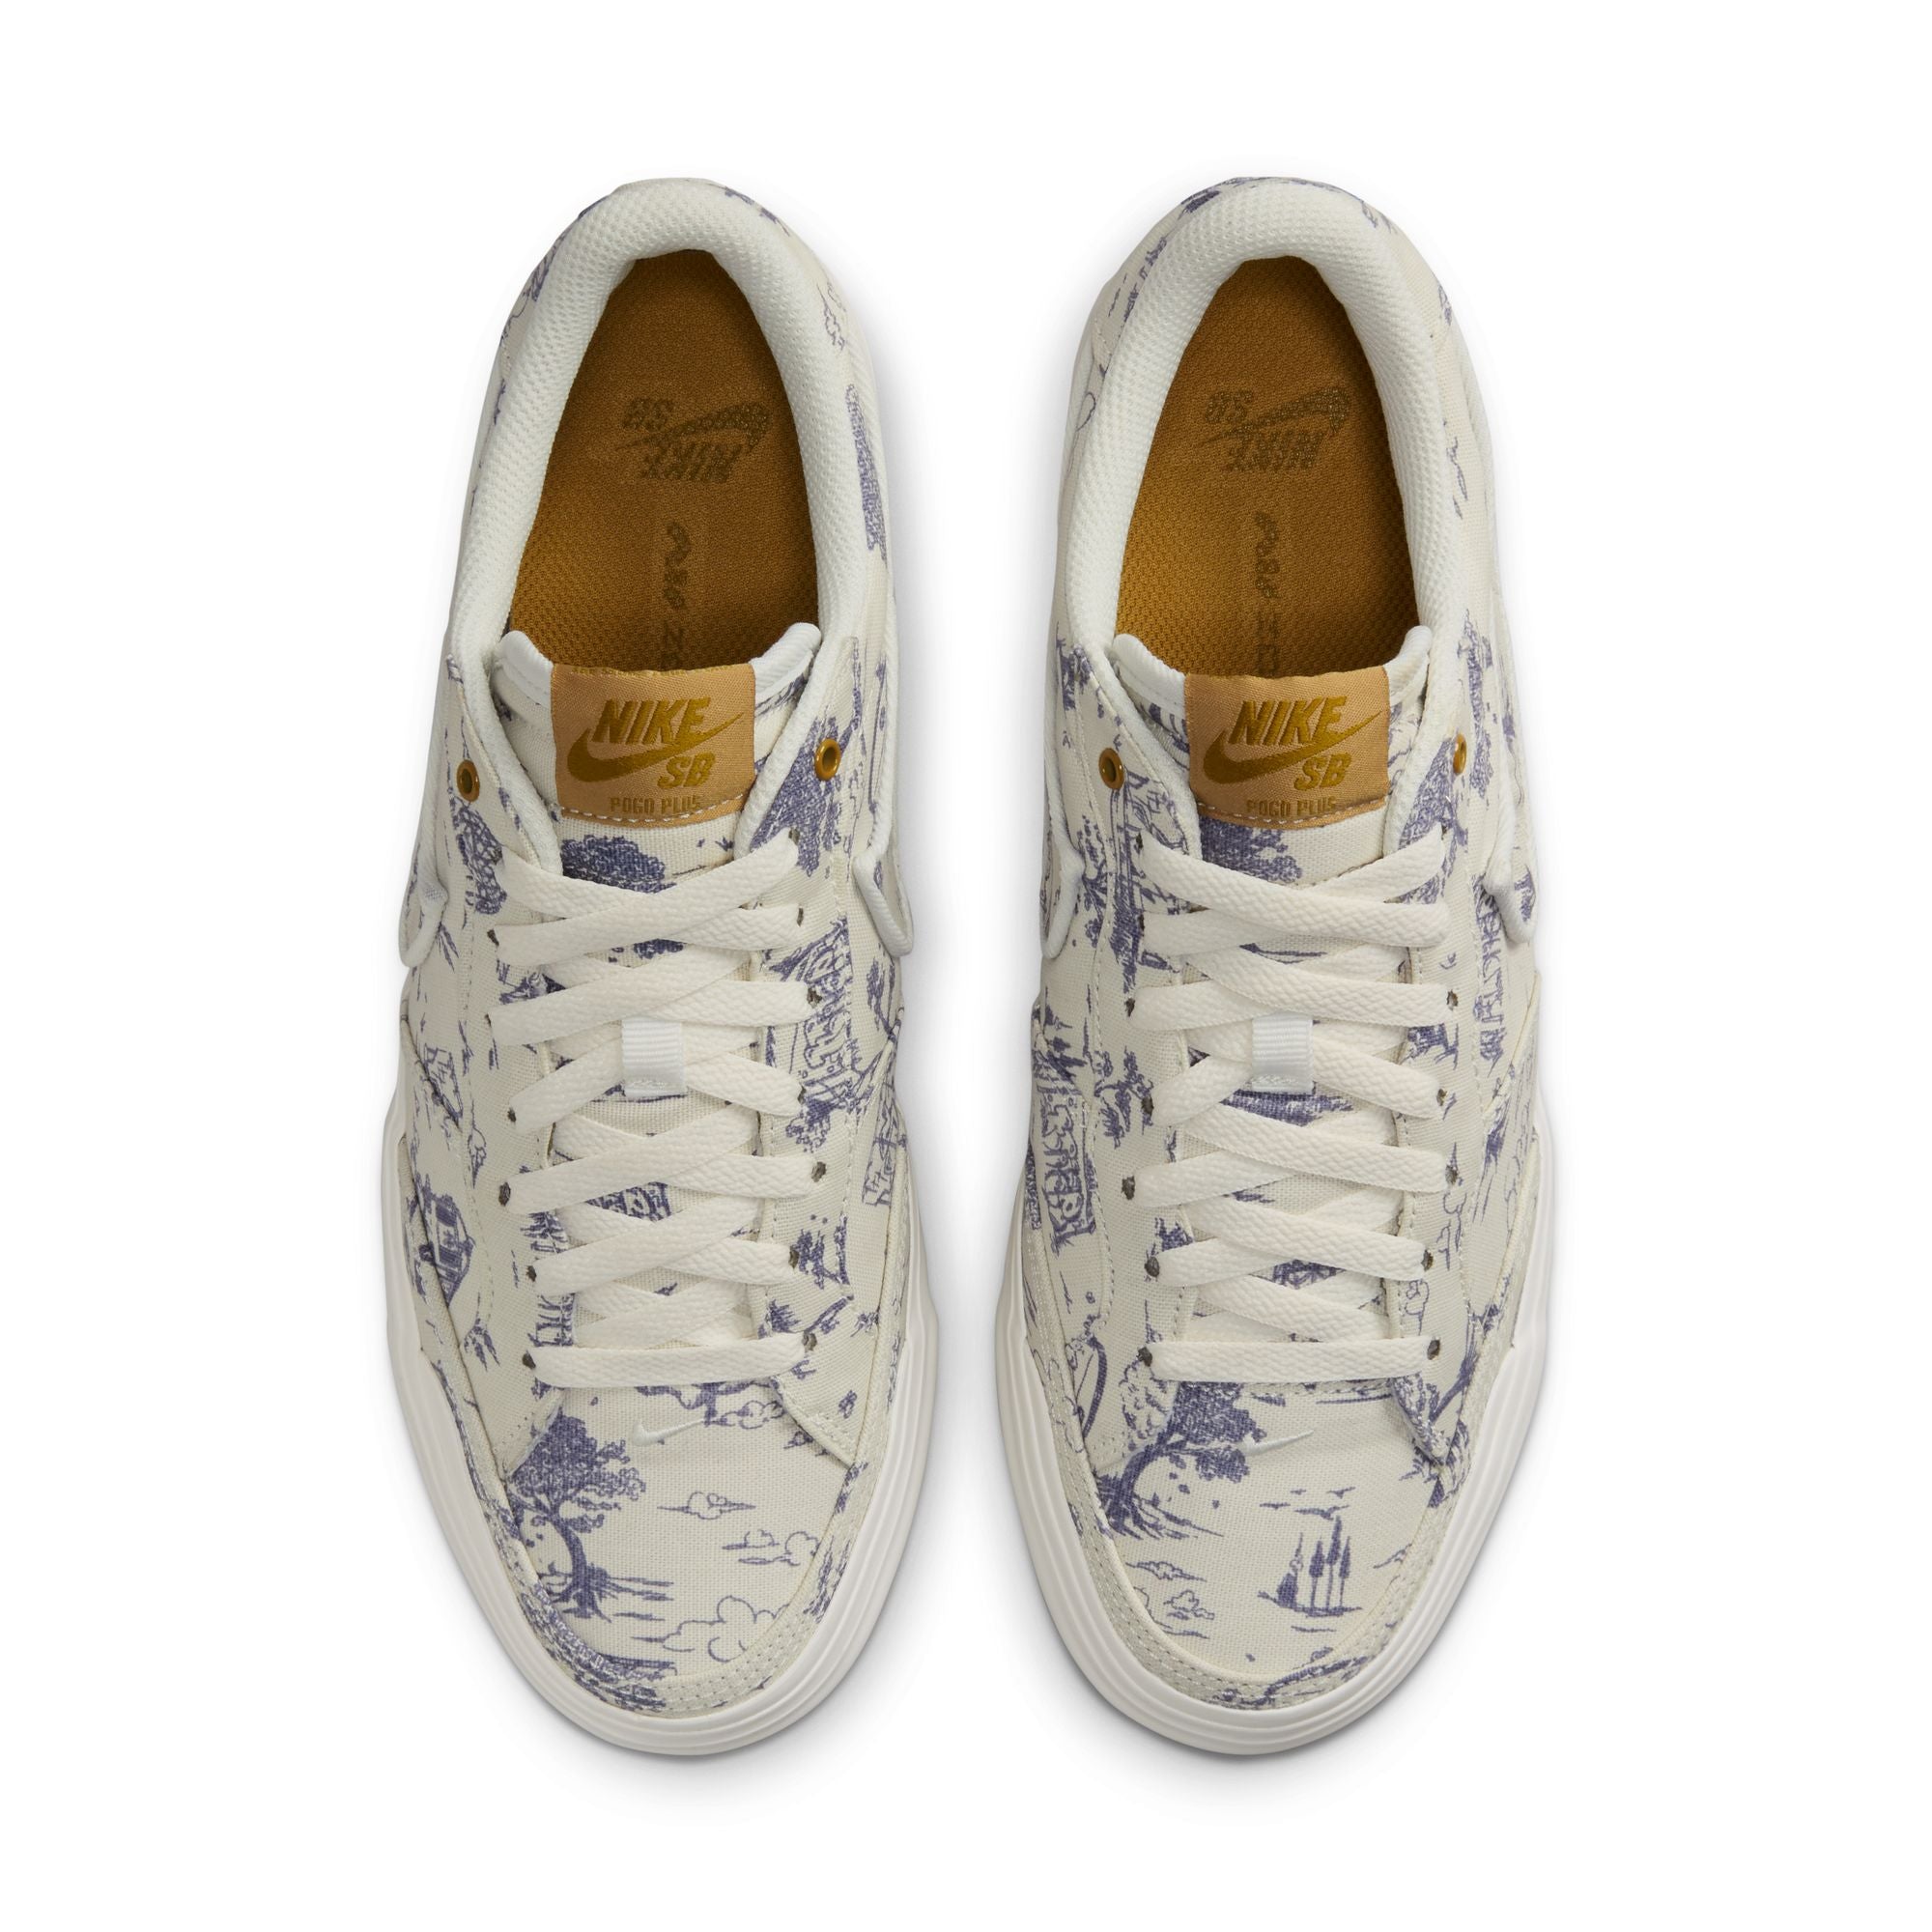 Cream nike sb pogo plus premium low top shoes with pastoral print, white midsole and brown nike sb tab on tongue. Free uk shipping over £50